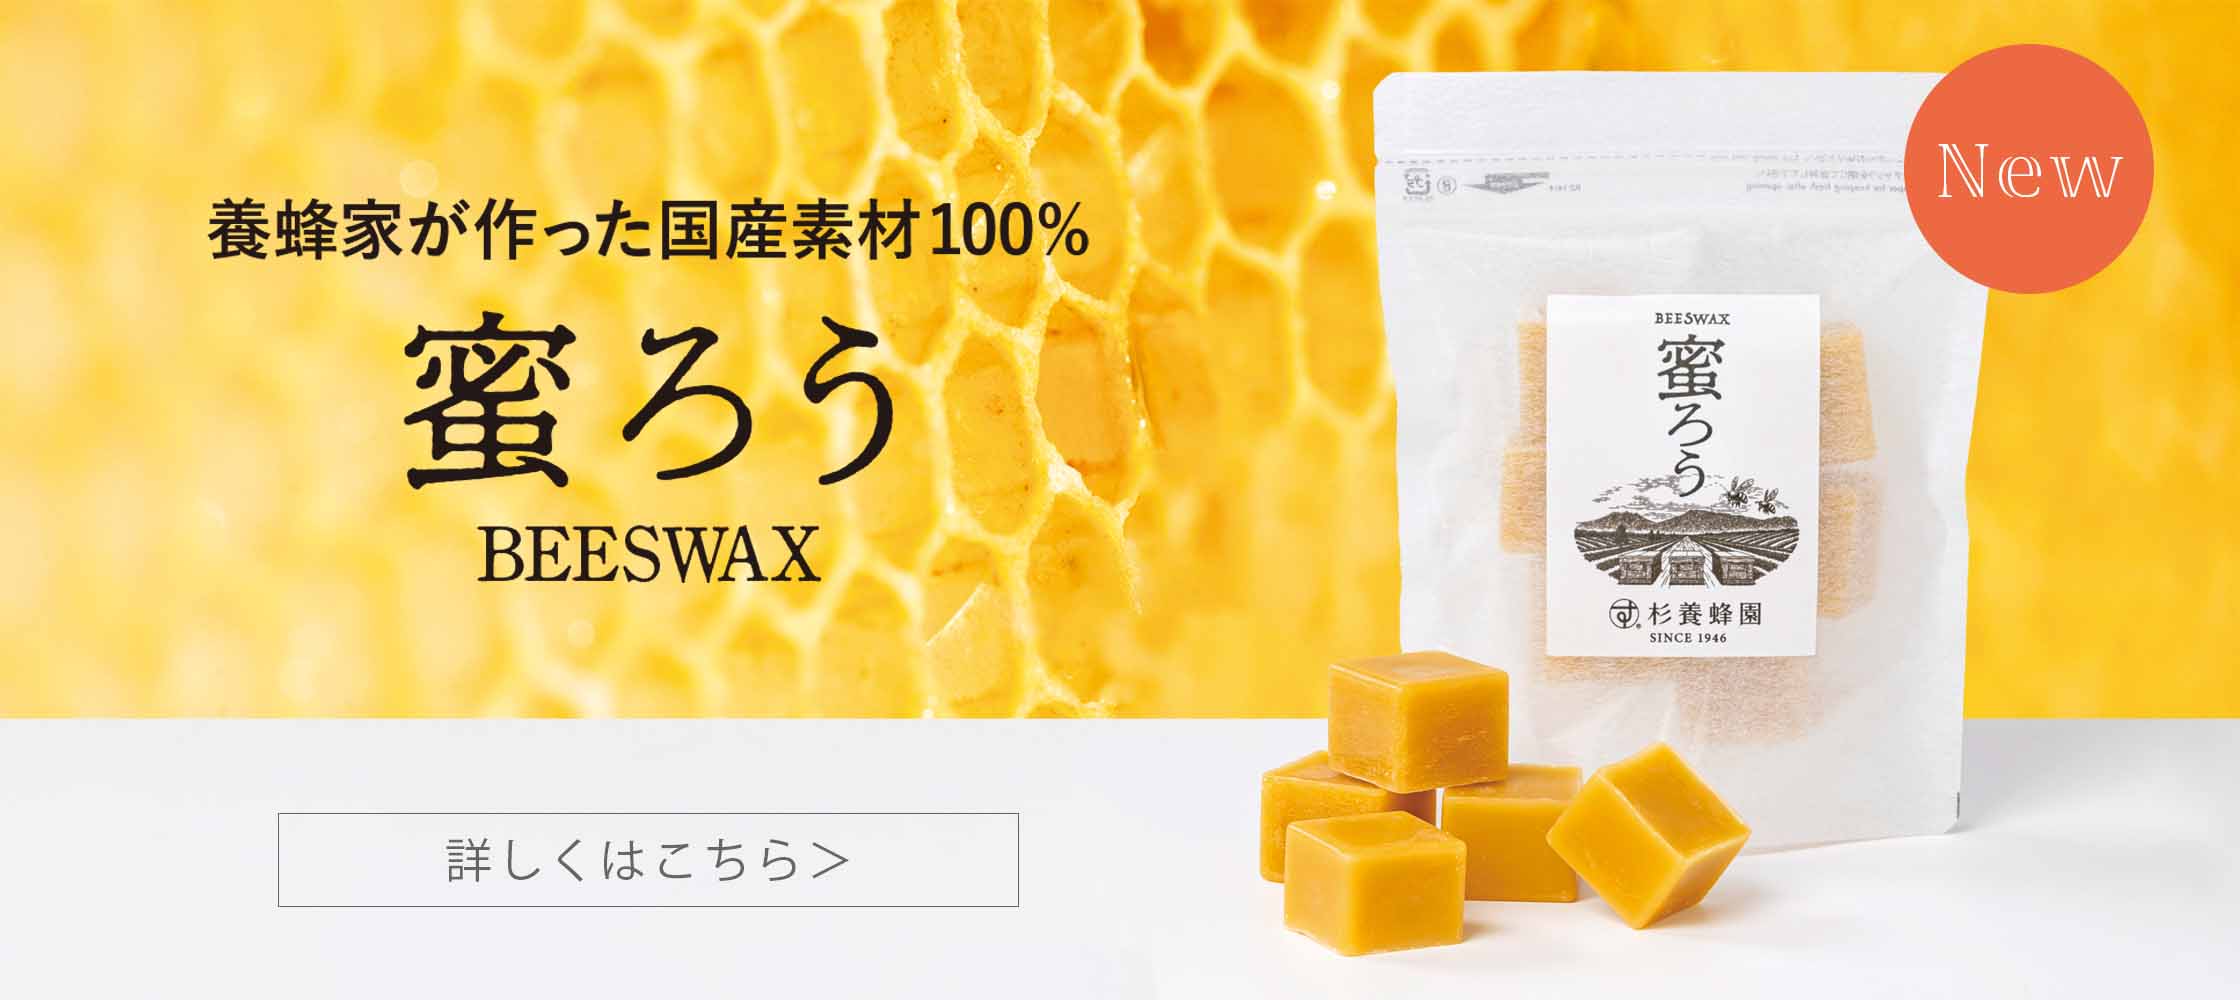 Beeswax New Release